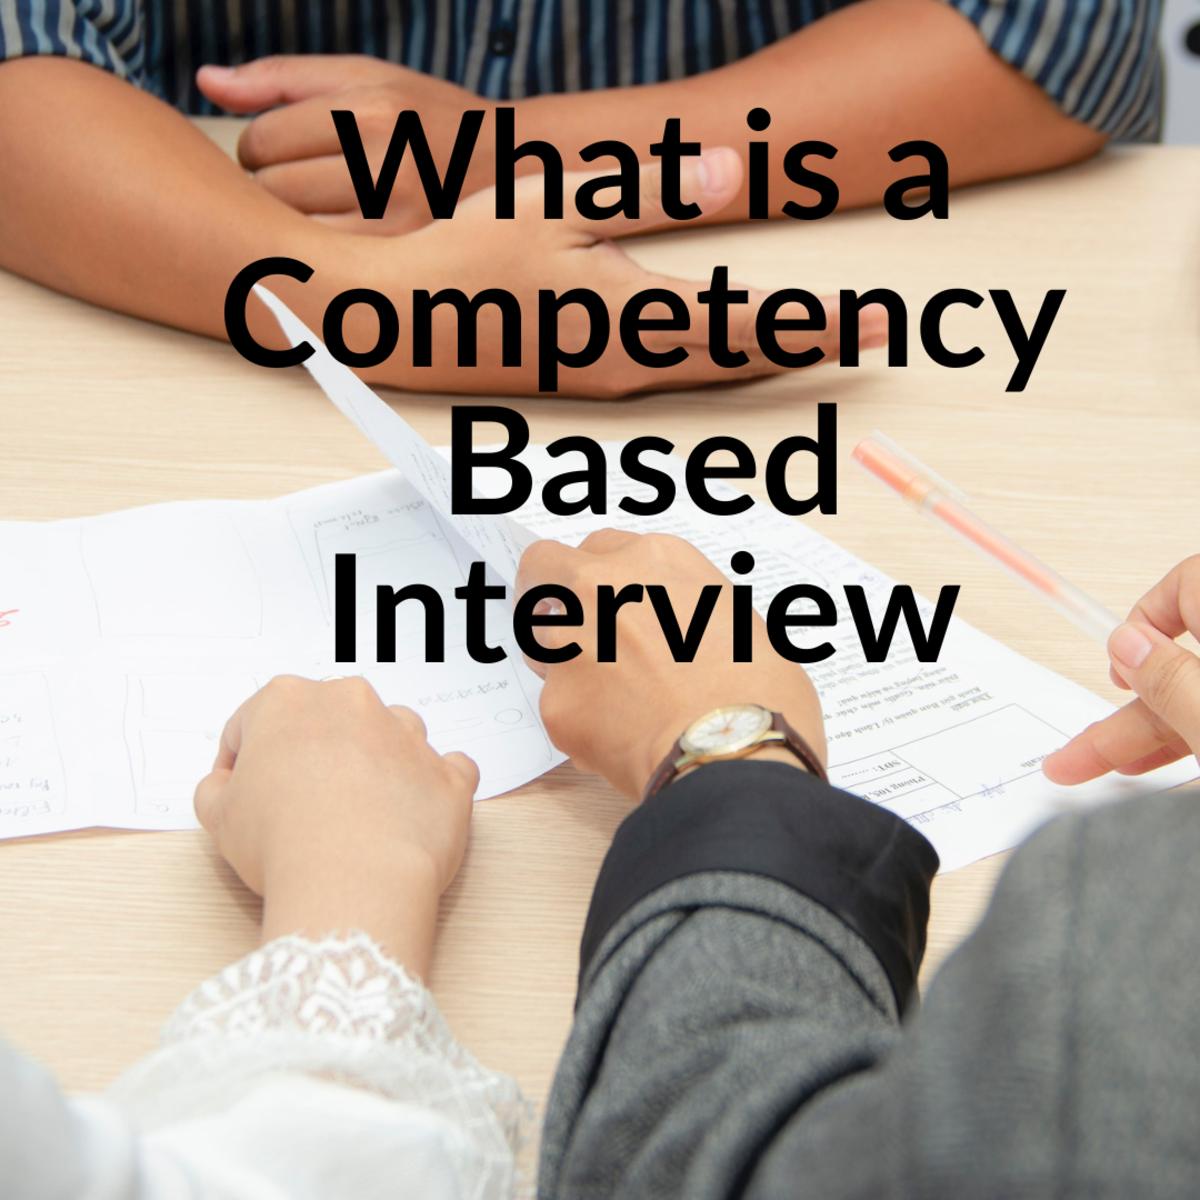 How to Prepare Questions and Answers for a Competency Based Interview